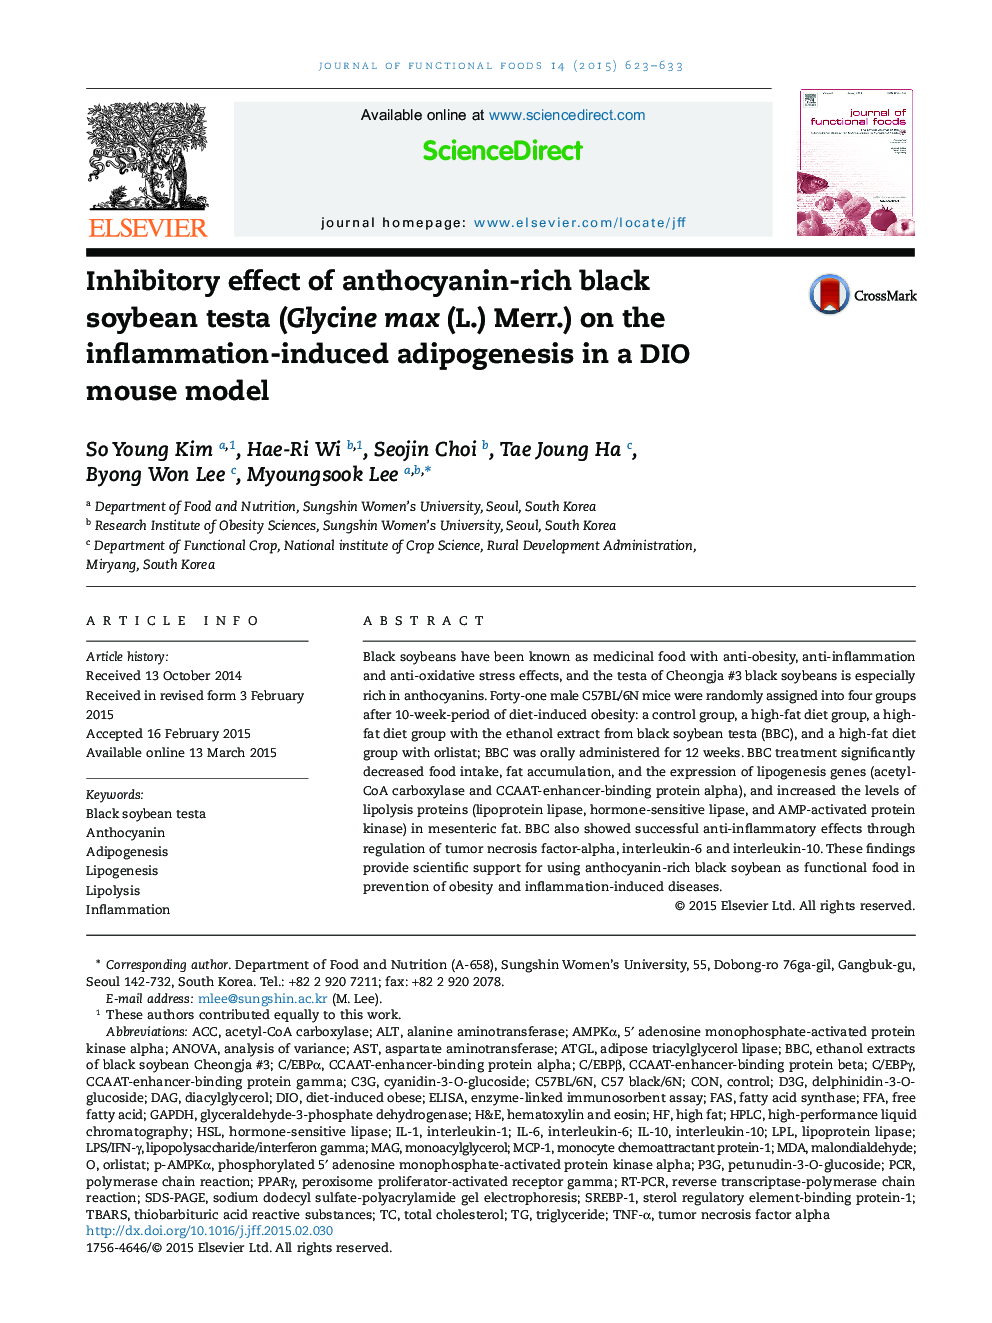 Inhibitory effect of anthocyanin-rich black soybean testa (Glycine max (L.) Merr.) on the inflammation-induced adipogenesis in a DIO mouse model